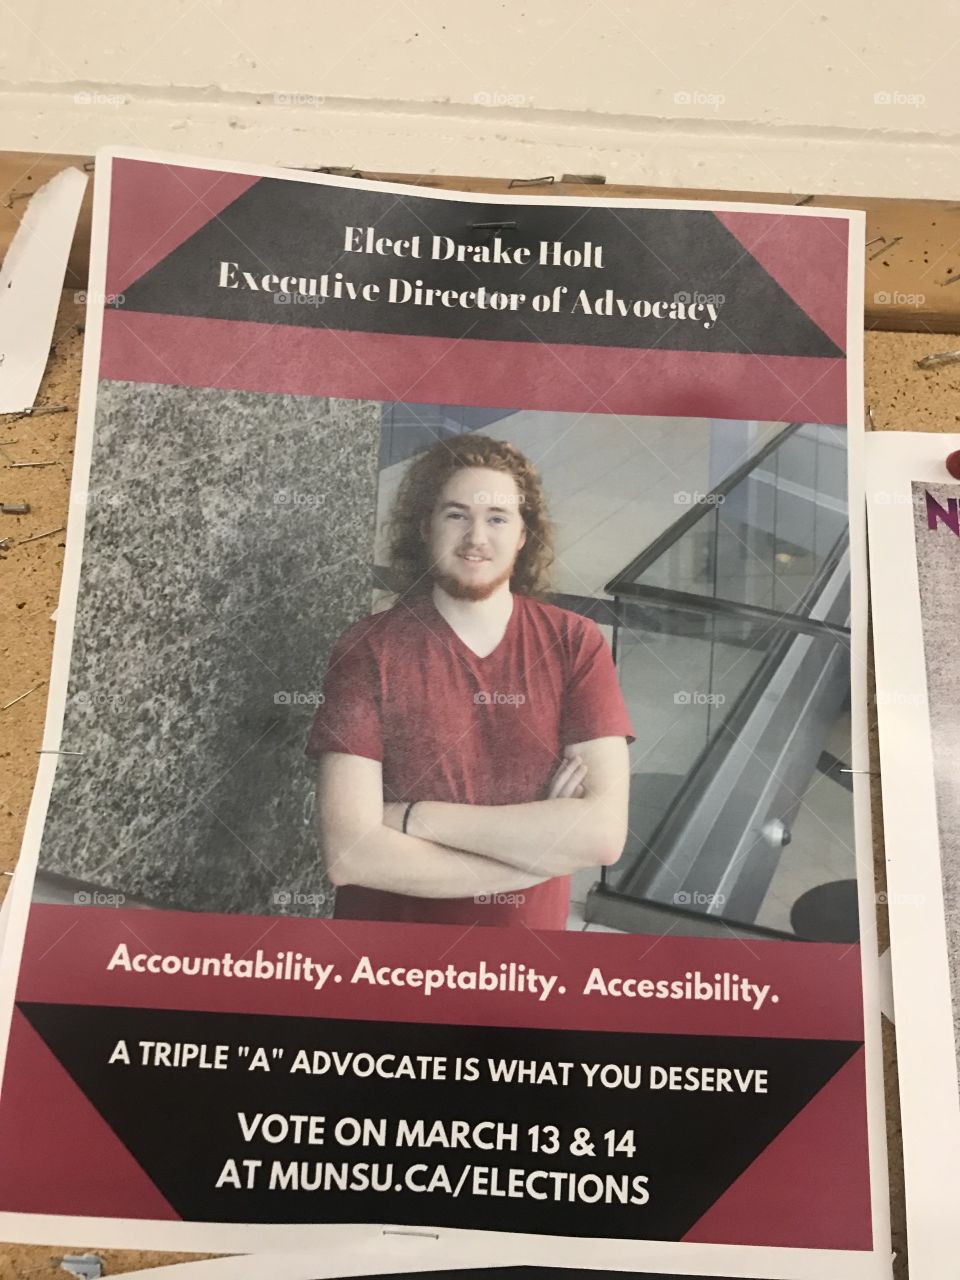 Yet another photo that shows you the types of campaign posters you can expect to see in student union elections on the MUN (memorial university of Newfoundland) St. John’s campus. Wordplay is a common device in such populist elections on campus 